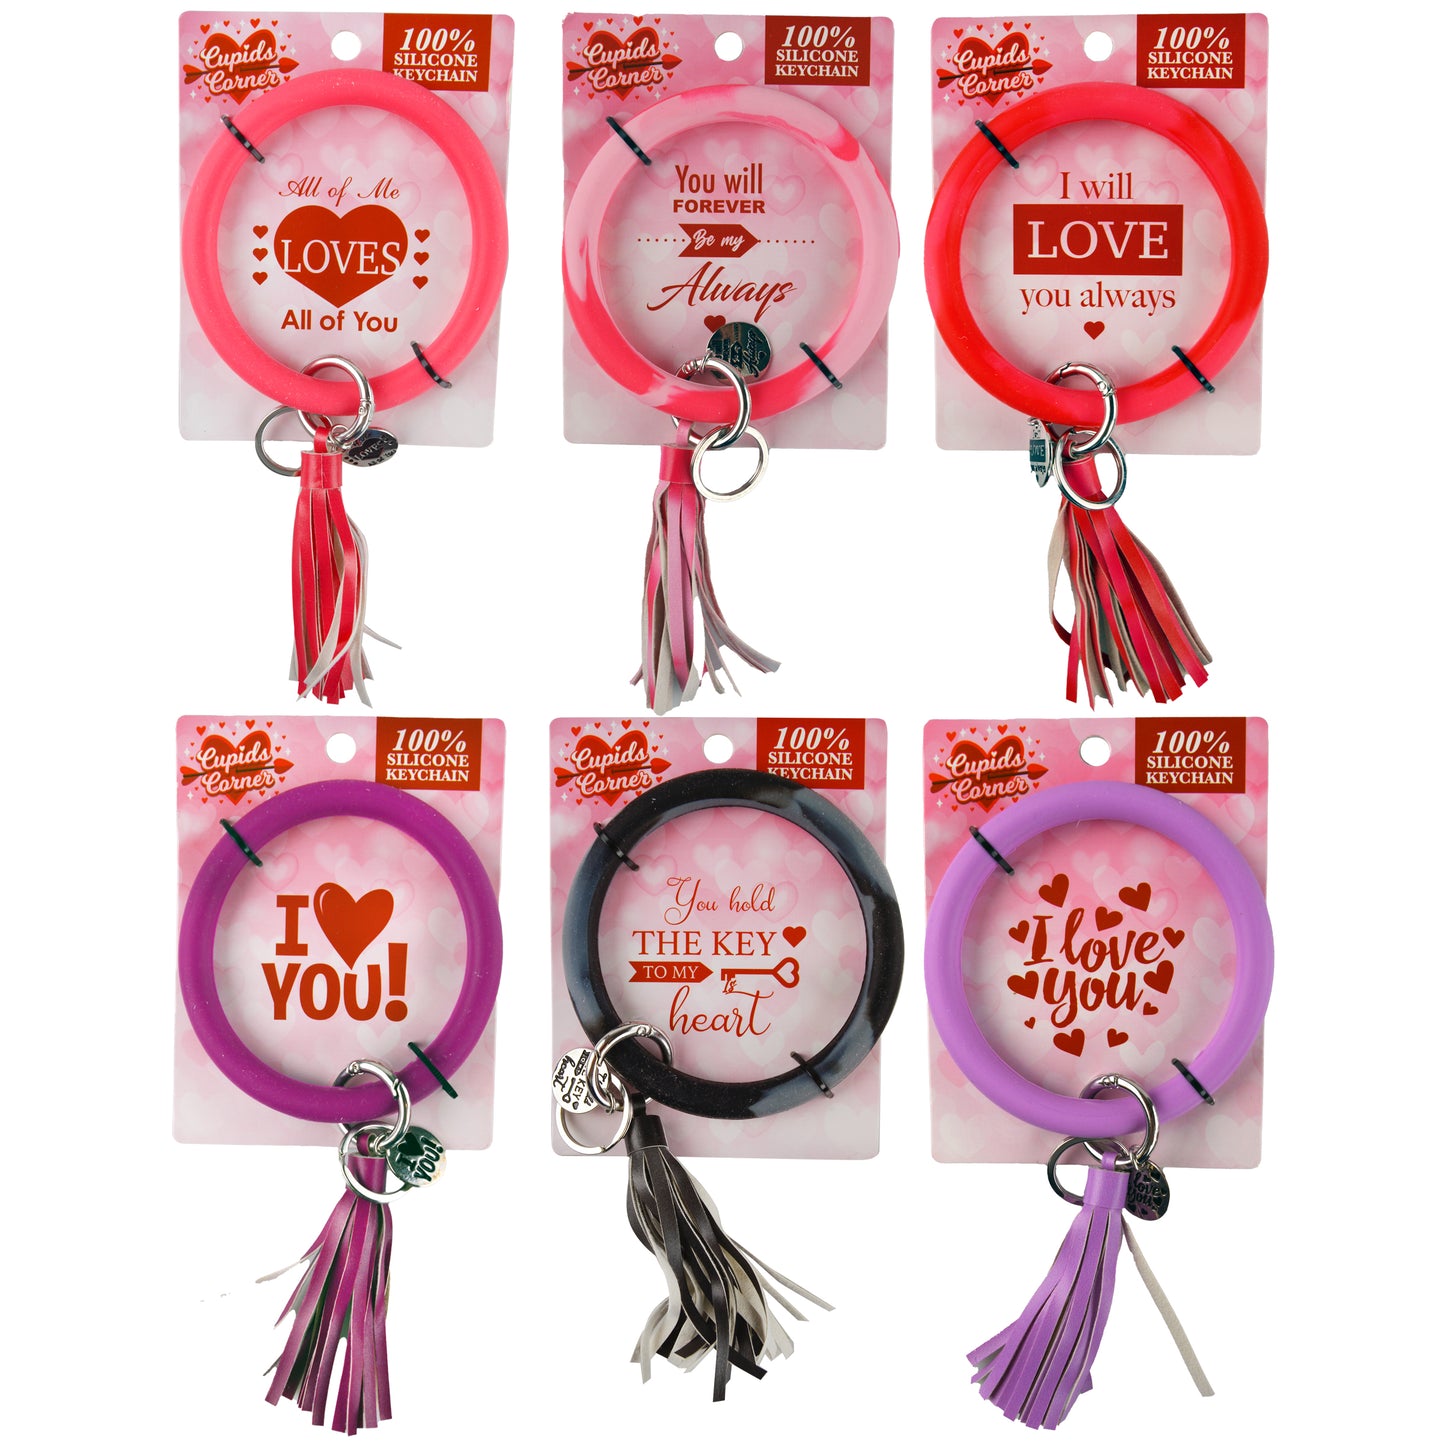 ITEM NUMBER 022825L SILICONE RING KEYCHAIN - STORE SURPLUS NO DISPLAY 6 PIECES PER PACK